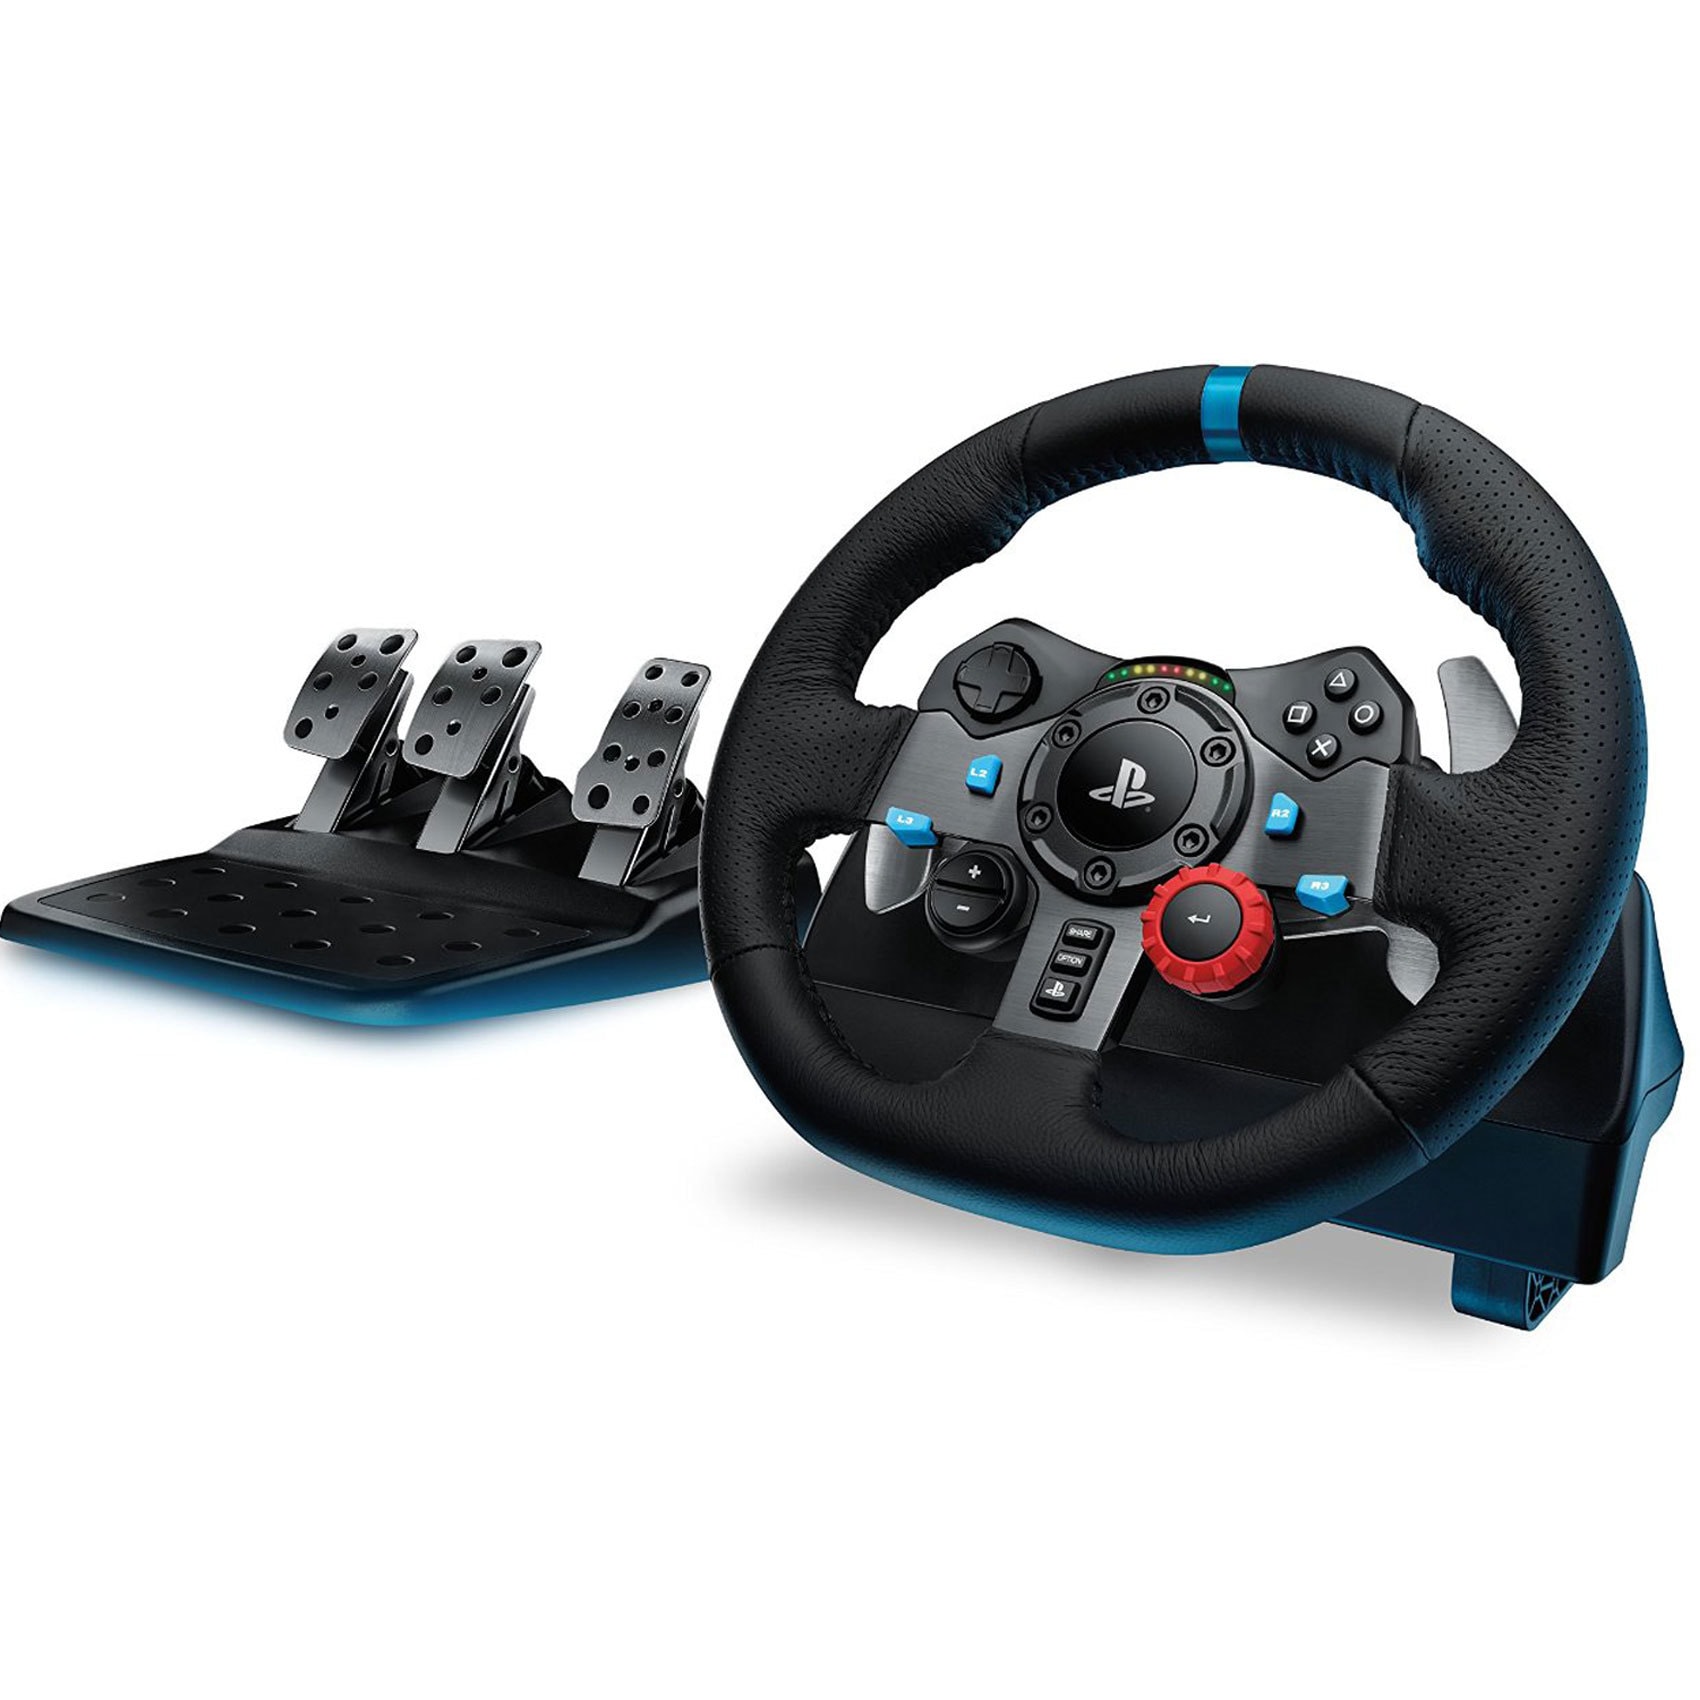 Buy Logitech Gaming Steering Wheel G29 For Ps4 Online Shop Electronics Appliances On Carrefour Uae